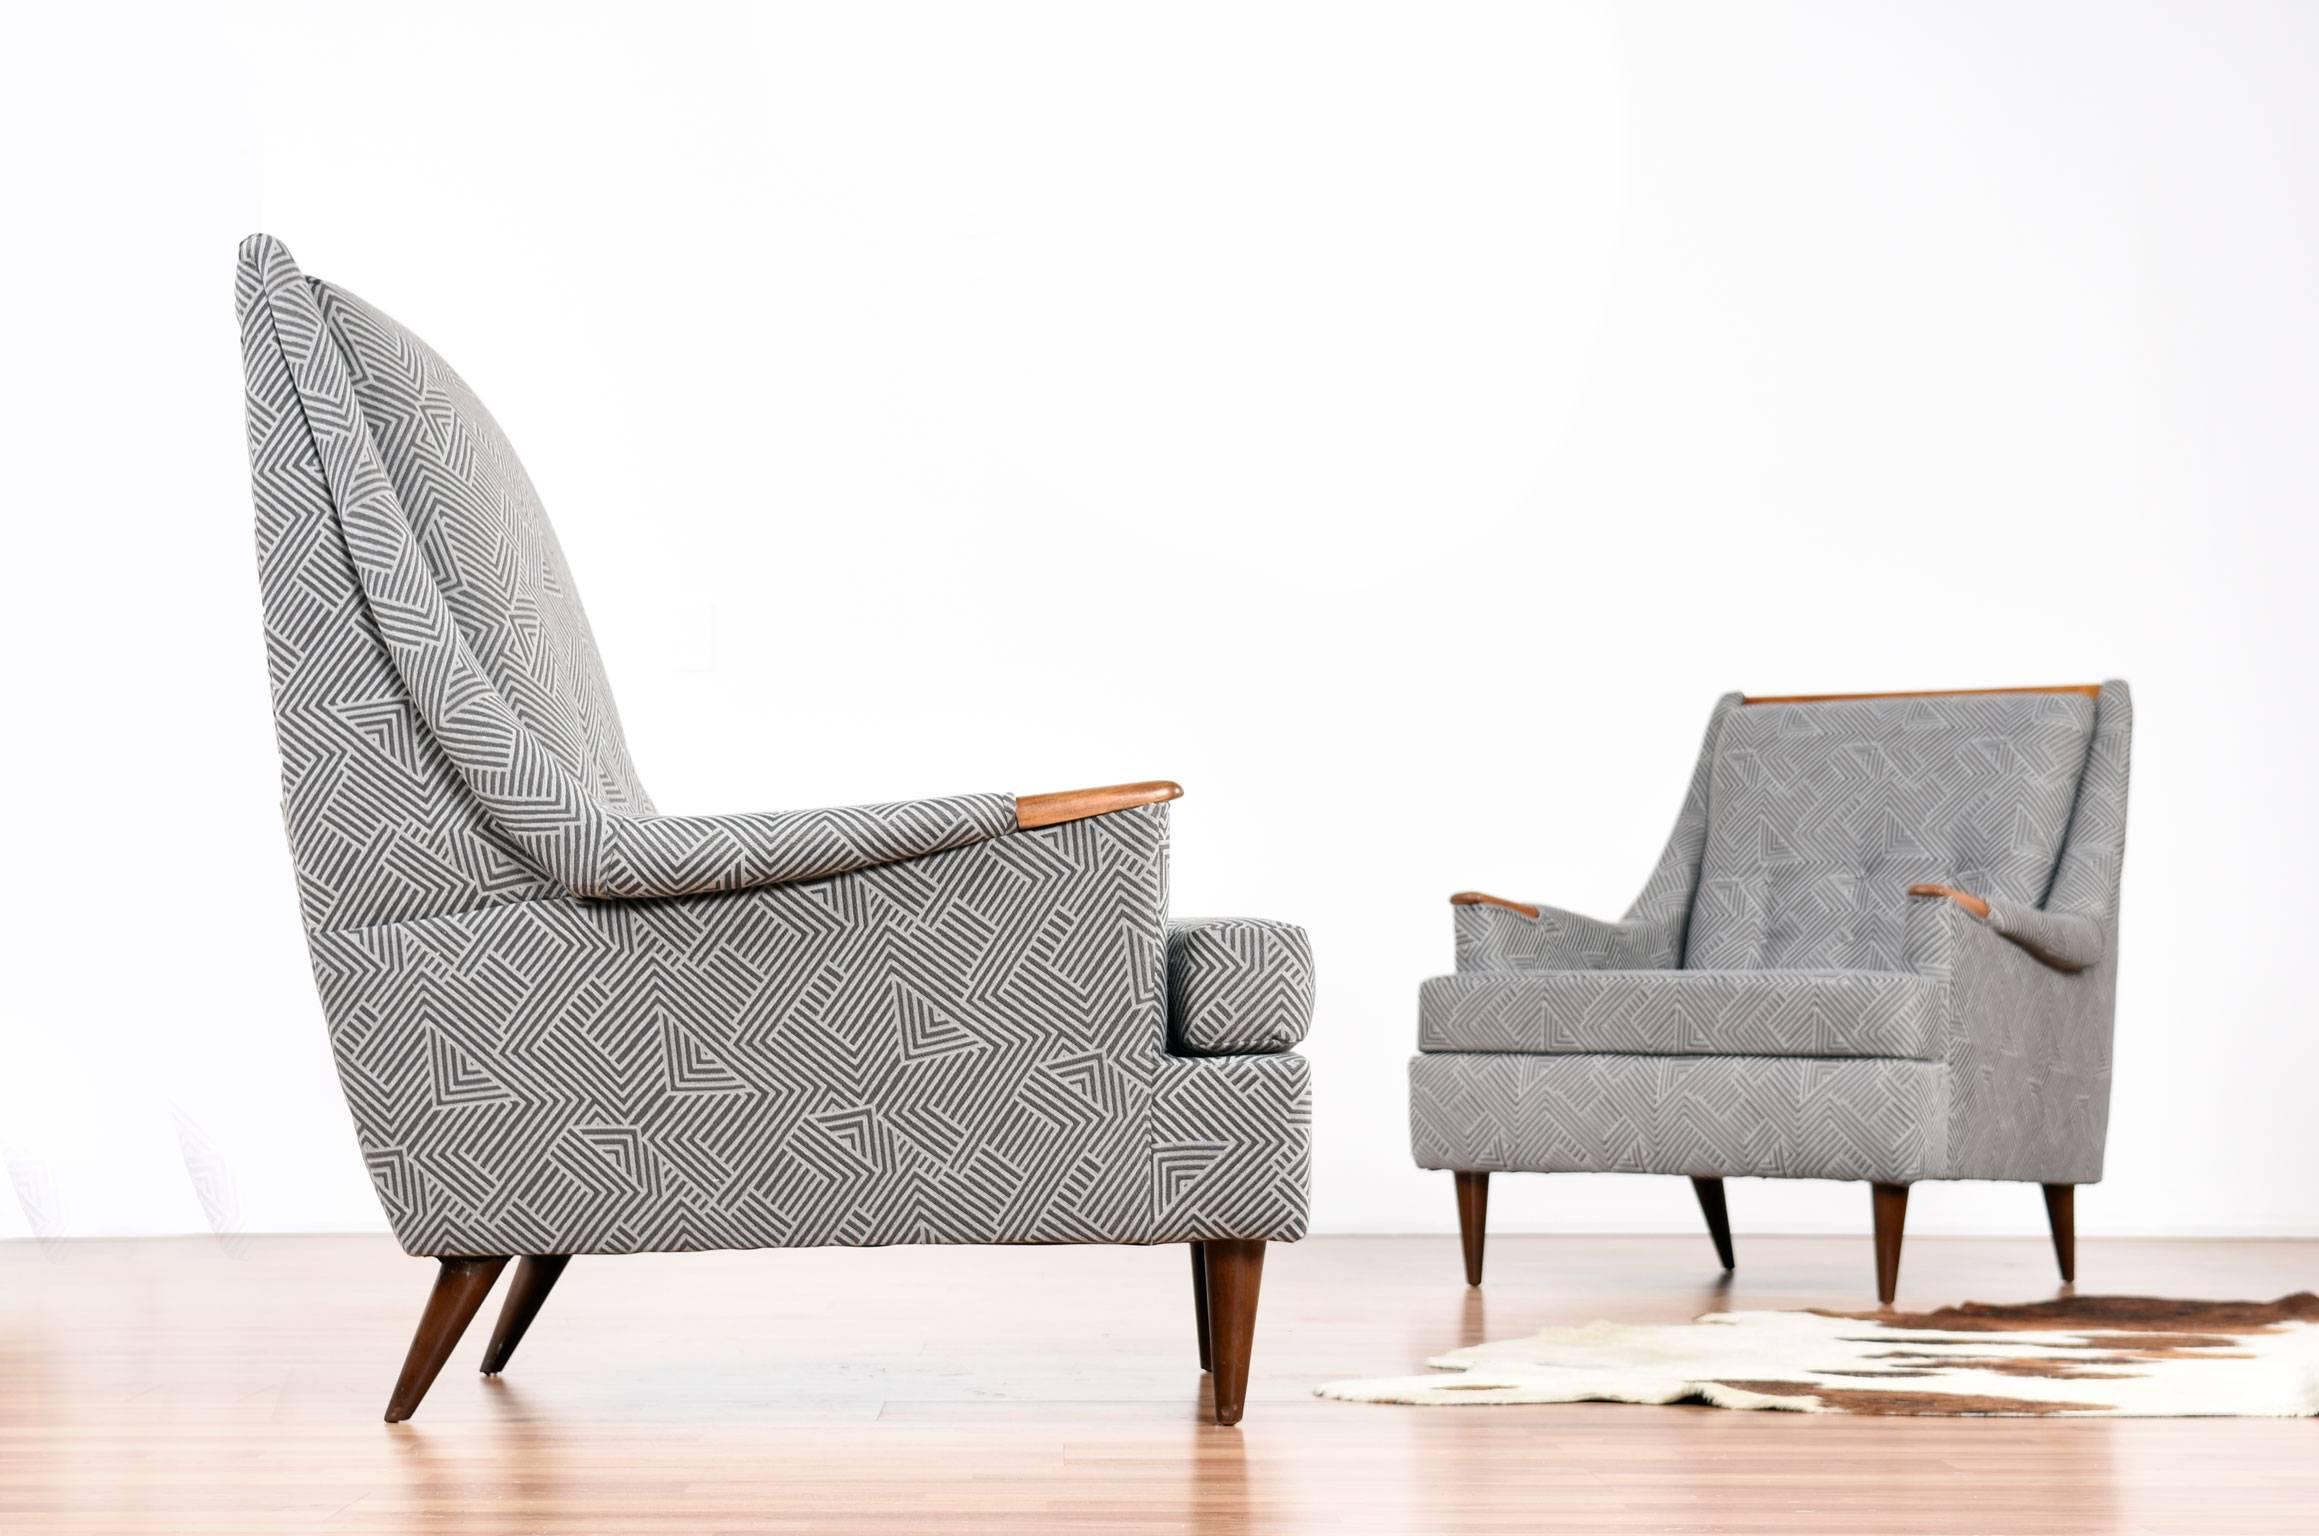 Restored Mid-Century Modern Kroehler "His & Her" lounge chairs by Avant Designs. The chairs feature the original label and are in the style of Adrian Pearsall. This stunning set has been recovered in a two-tone grey graphic print which